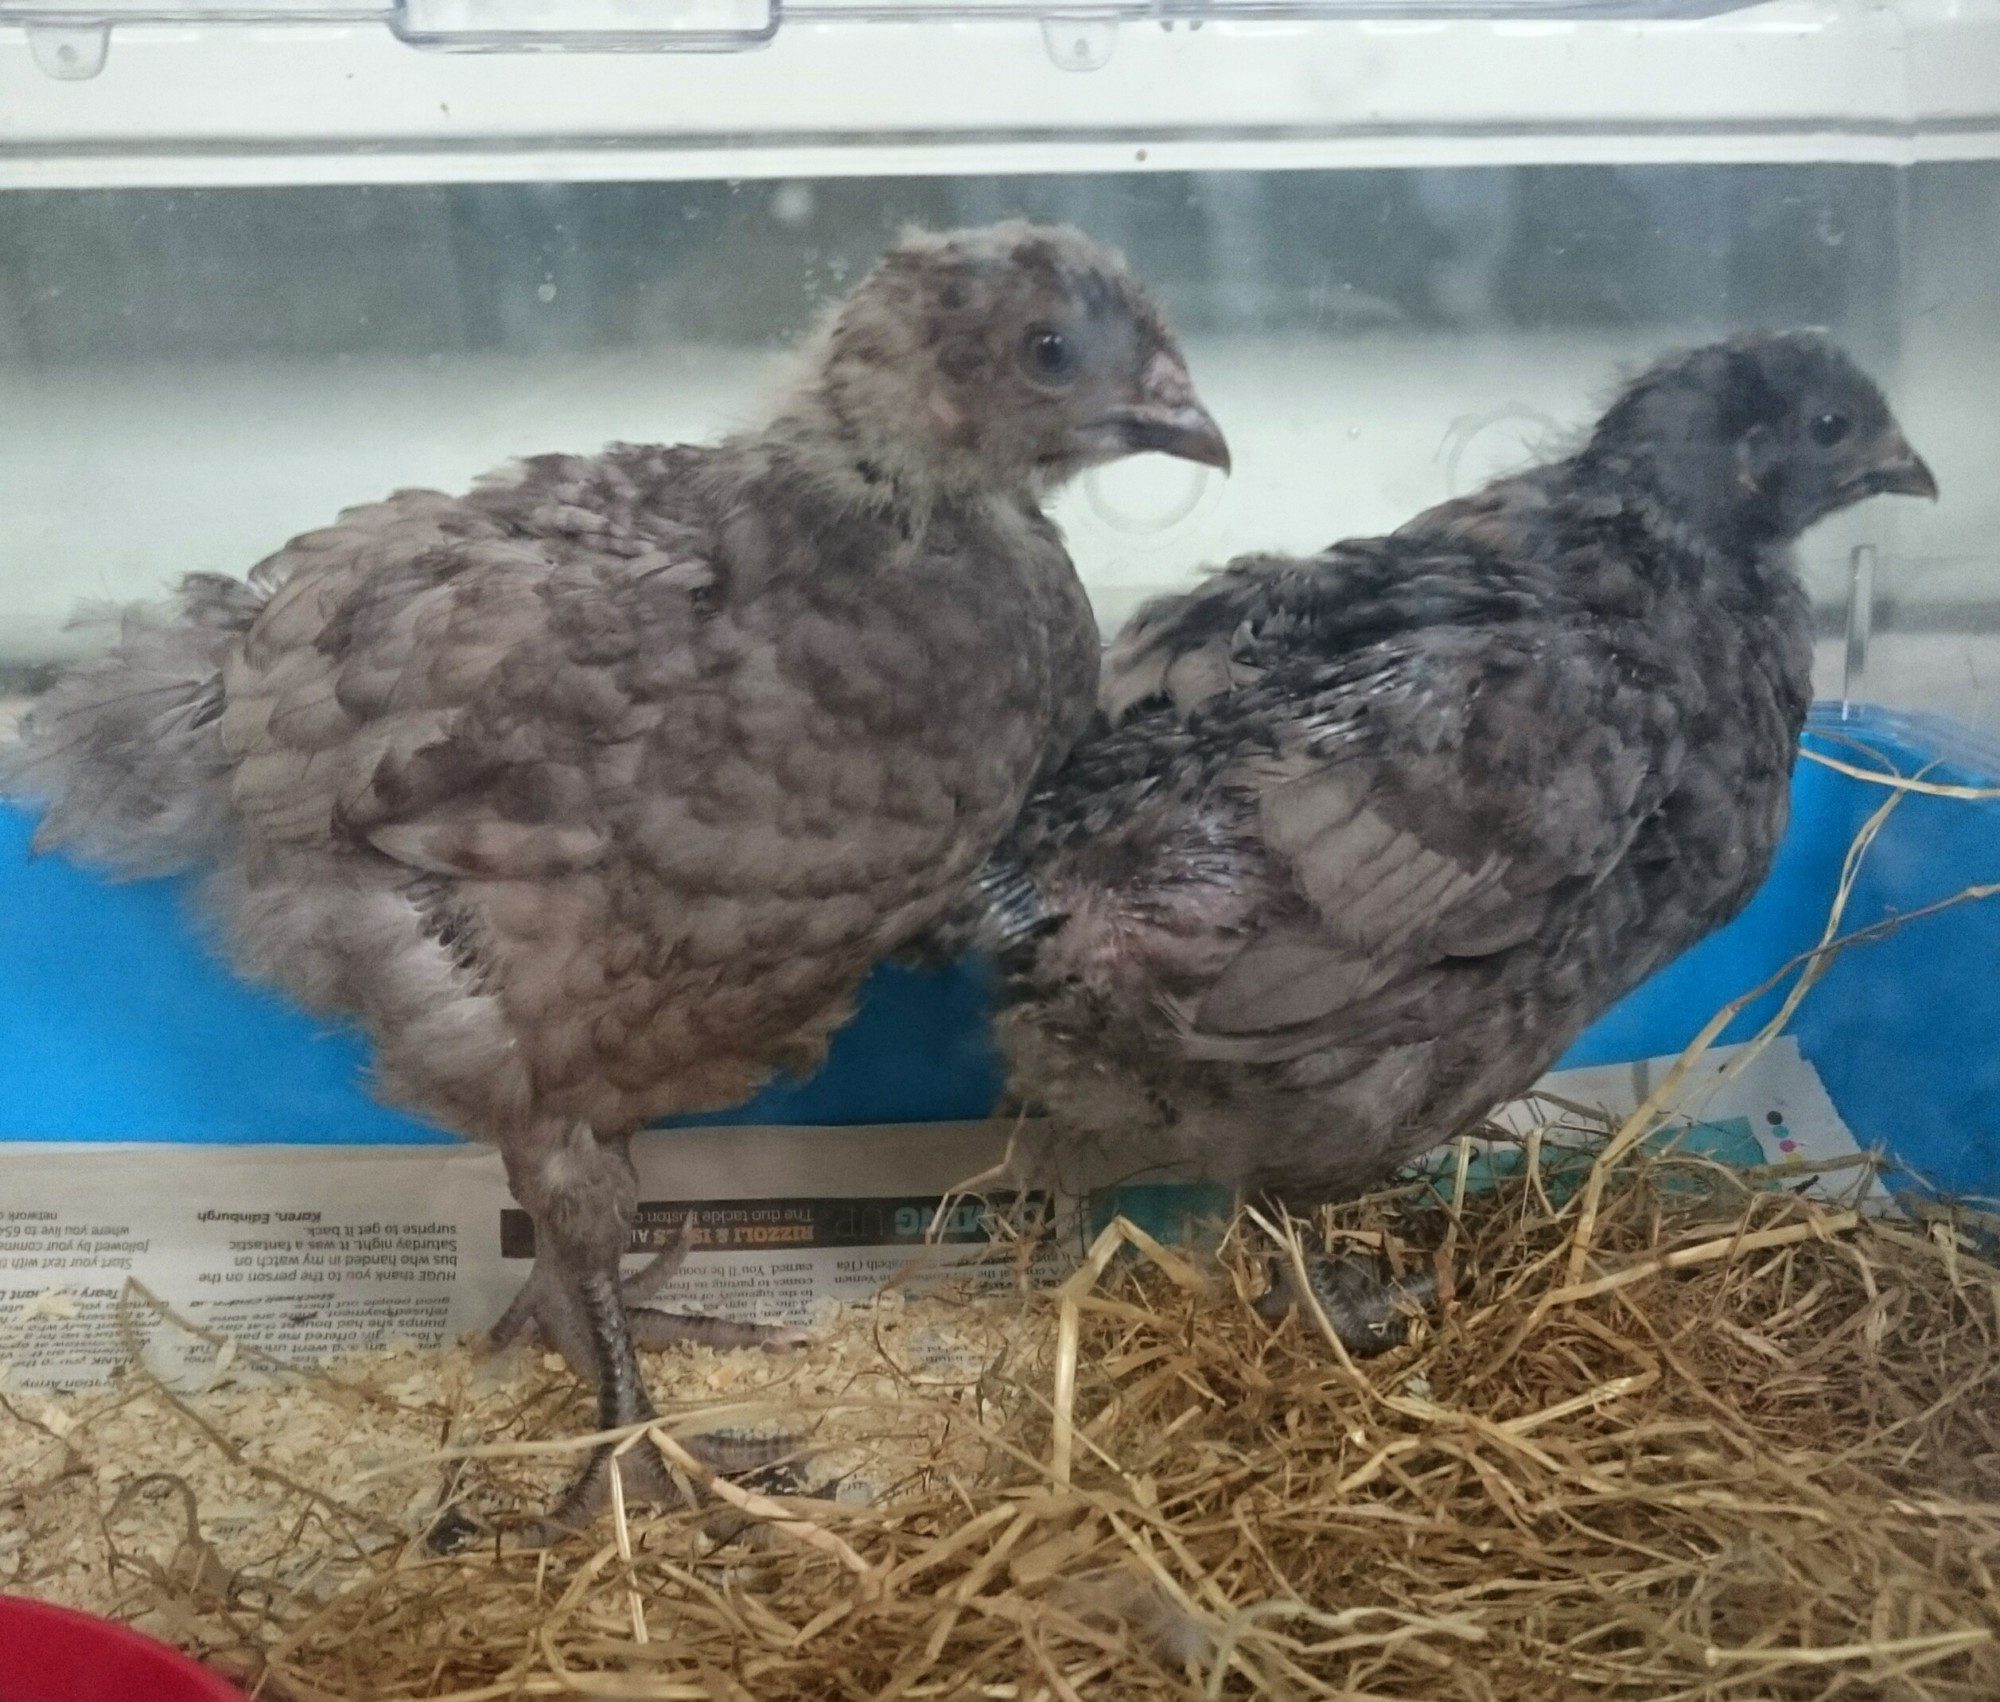 These are our Blue Ranger chick.  We only recently got them and think they are around 7 wks Old, we're not exactly sure and I was curious if anyone agreed or had a better idea idea?